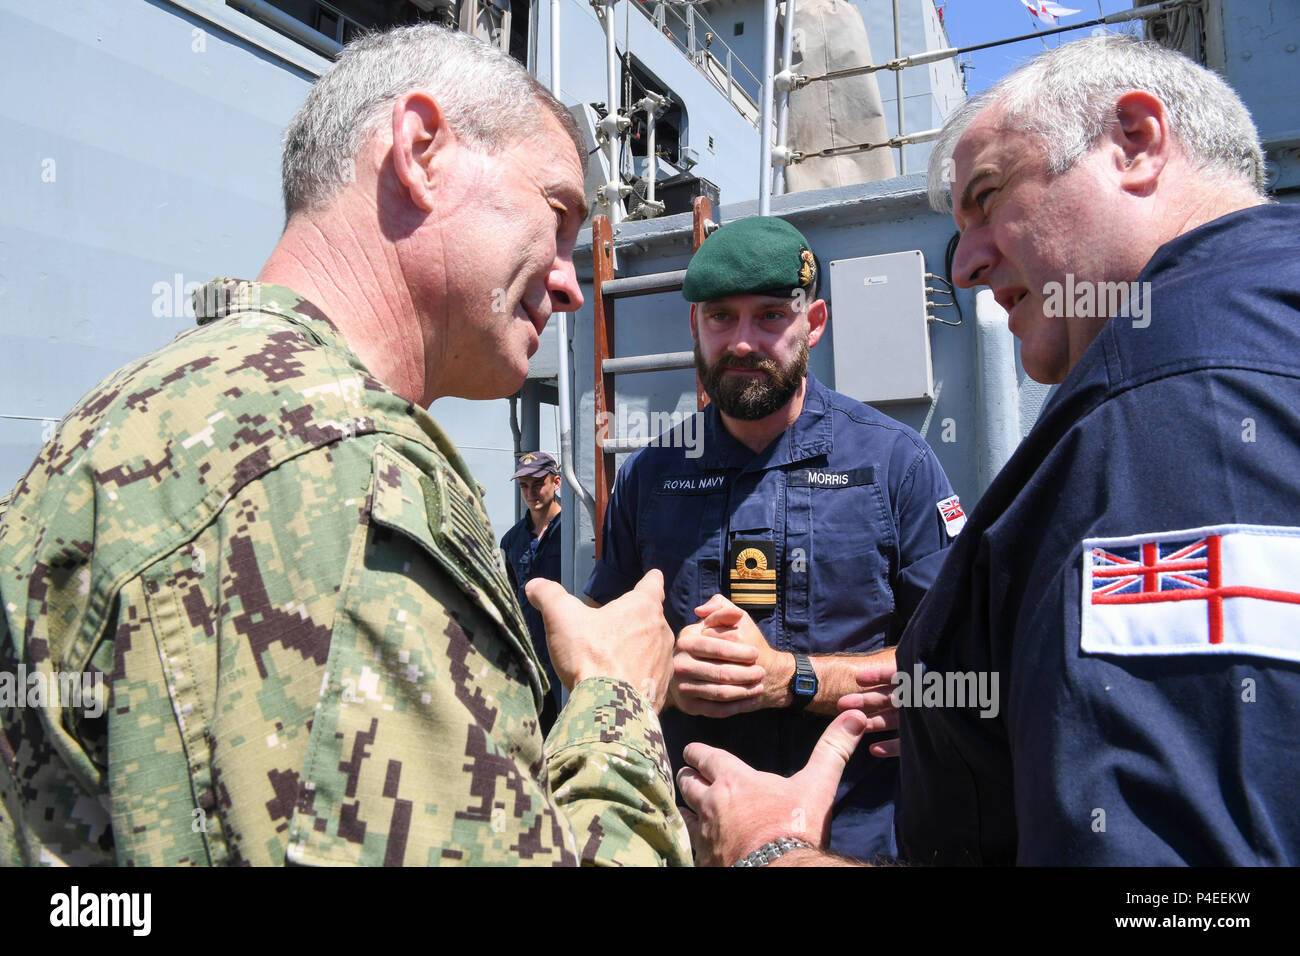 180617-N-TB177-0055 ARABIAN GULF (June 17, 2018) Vice Adm. Scott Stearney, commander of U.S. Naval Forces Central Command, U.S. 5th Fleet, Combined Maritime Forces, left, speaks with members of the Royal Navy aboard HMS Middleton during Mine Countermeasures Exercise (MCMEX) 18-2. The bilateral exercise enhances cooperation, mutual MCM capabilities and interoperability between the U.S. and U.K., demonstrating the shared commitment of ensuring unfettered operations of naval and support vessels, as well as commercial shipping movements, throughout the maritime domain. (U.S. Navy photo by Mass Com Stock Photo